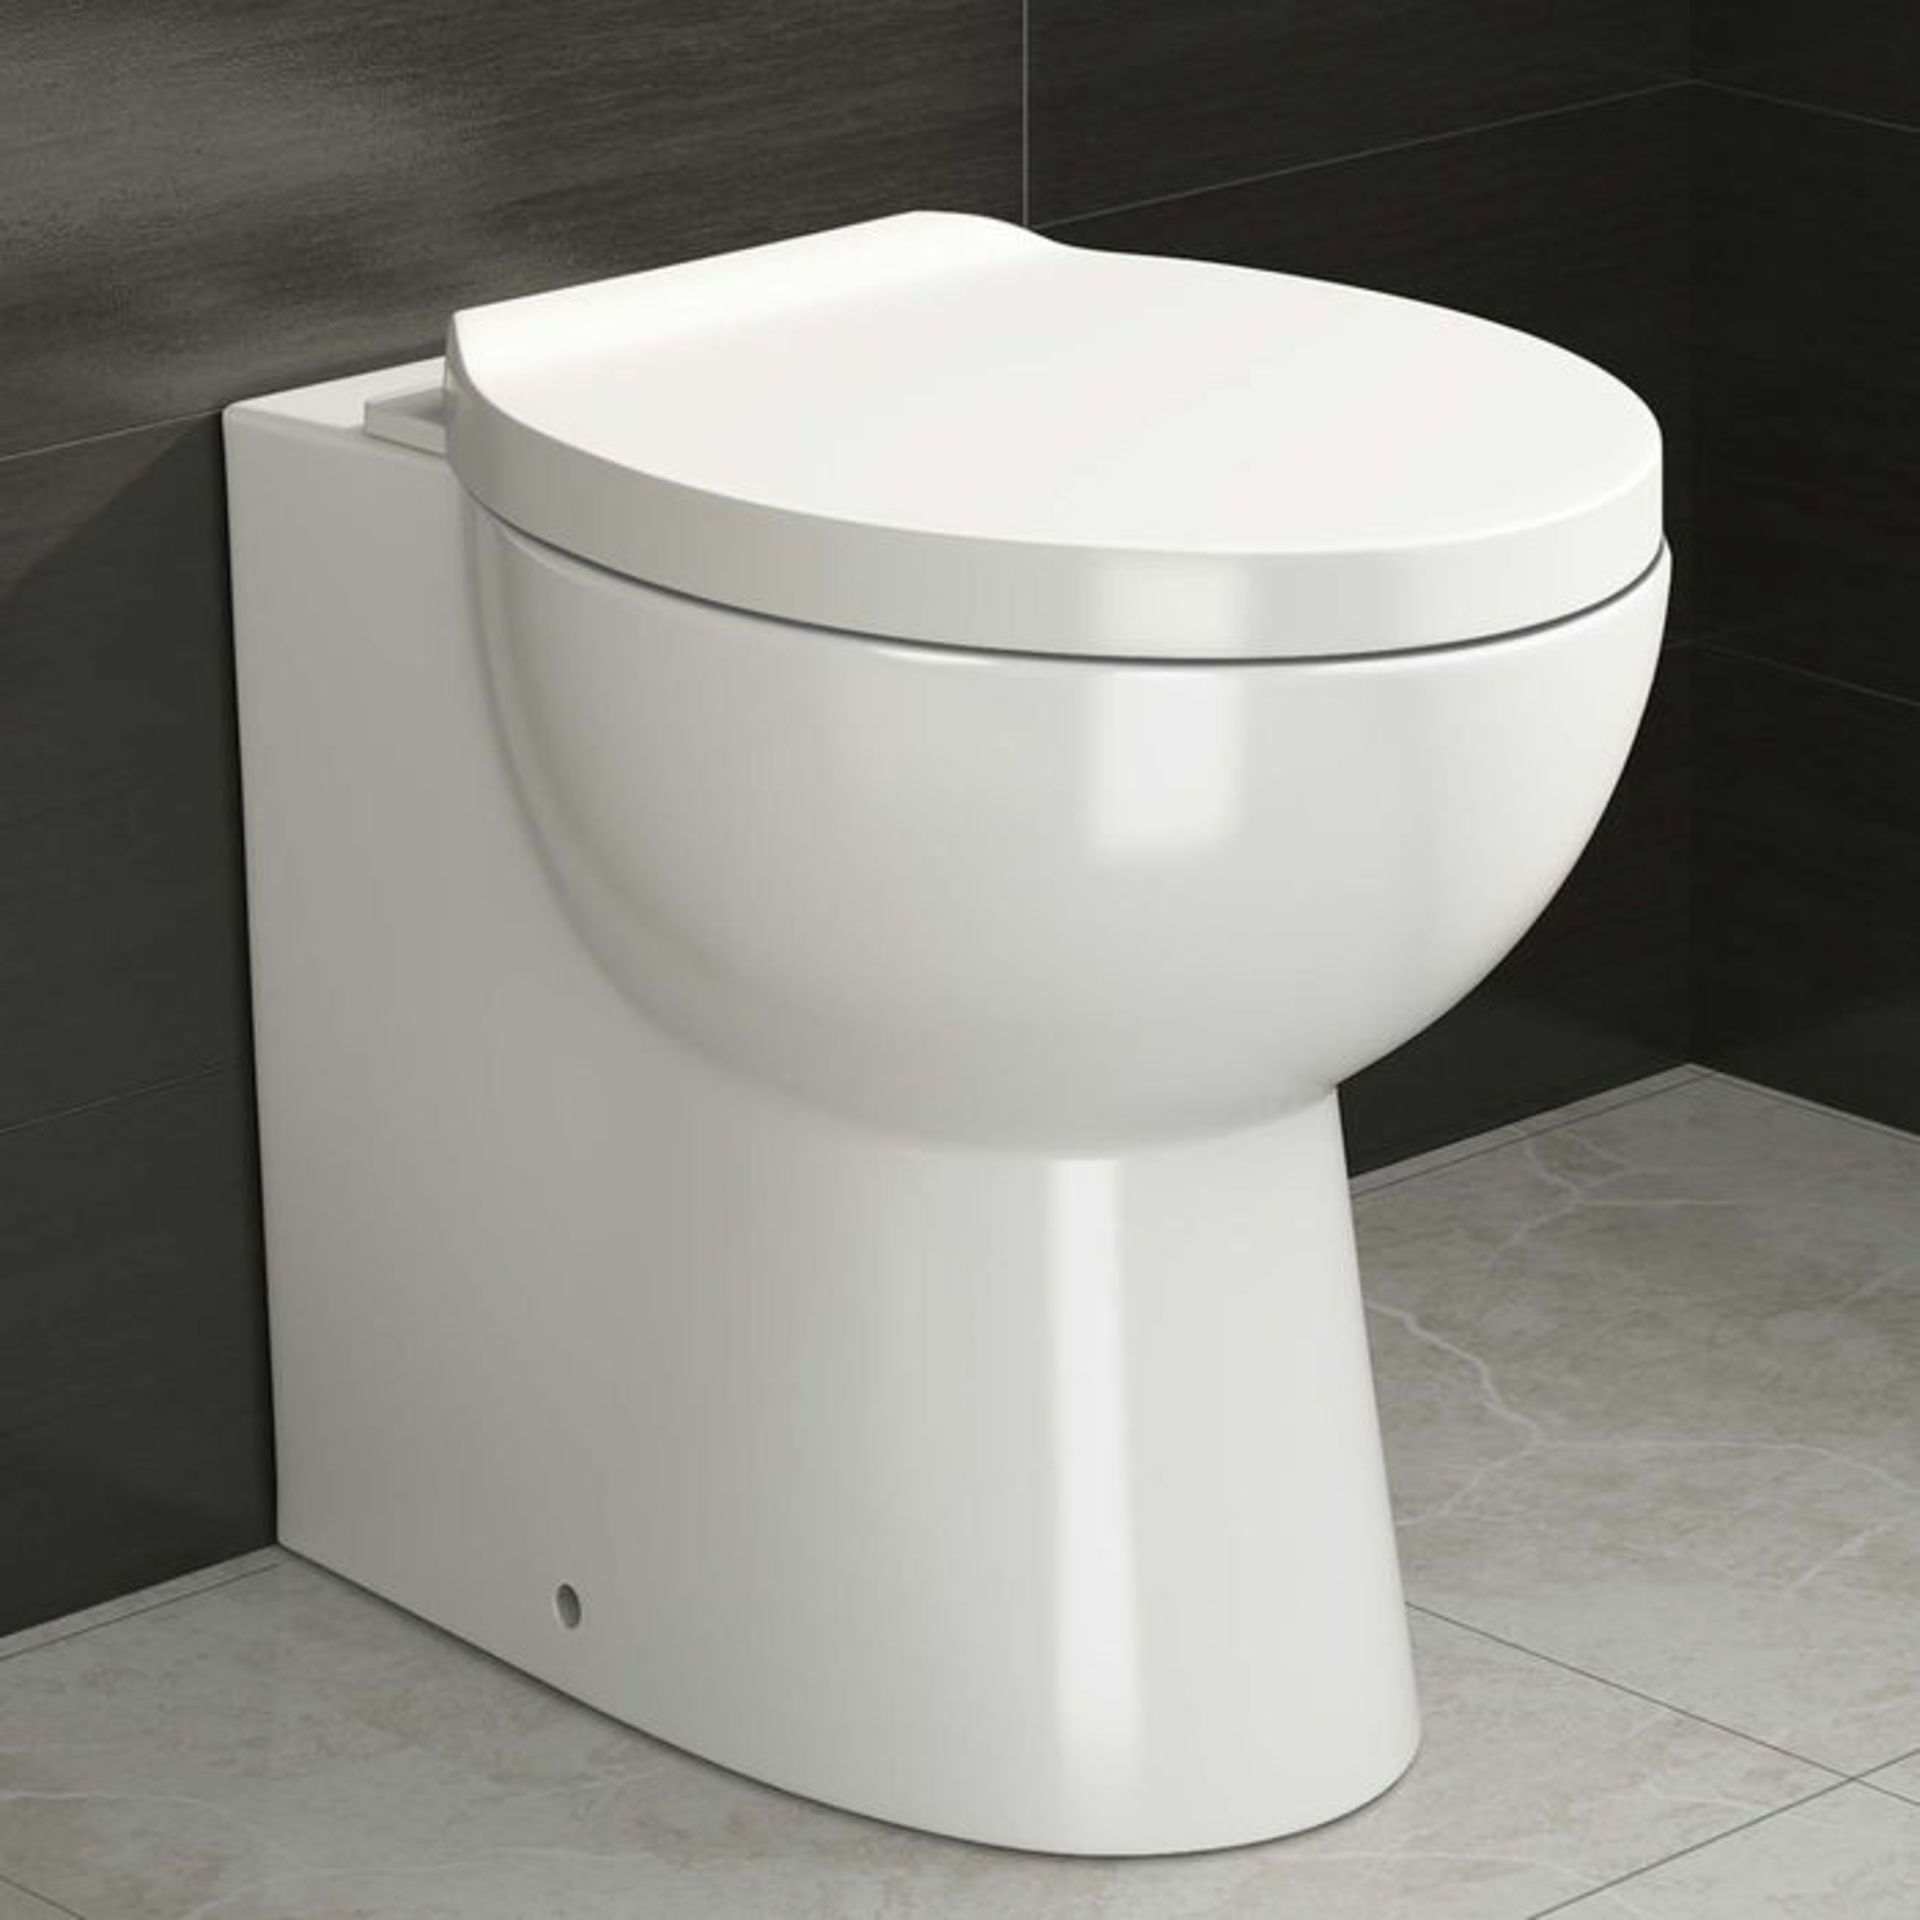 (G113) Crosby Back to Wall Toilet inc Soft Close Seat Made from White Vitreous China Finished in a